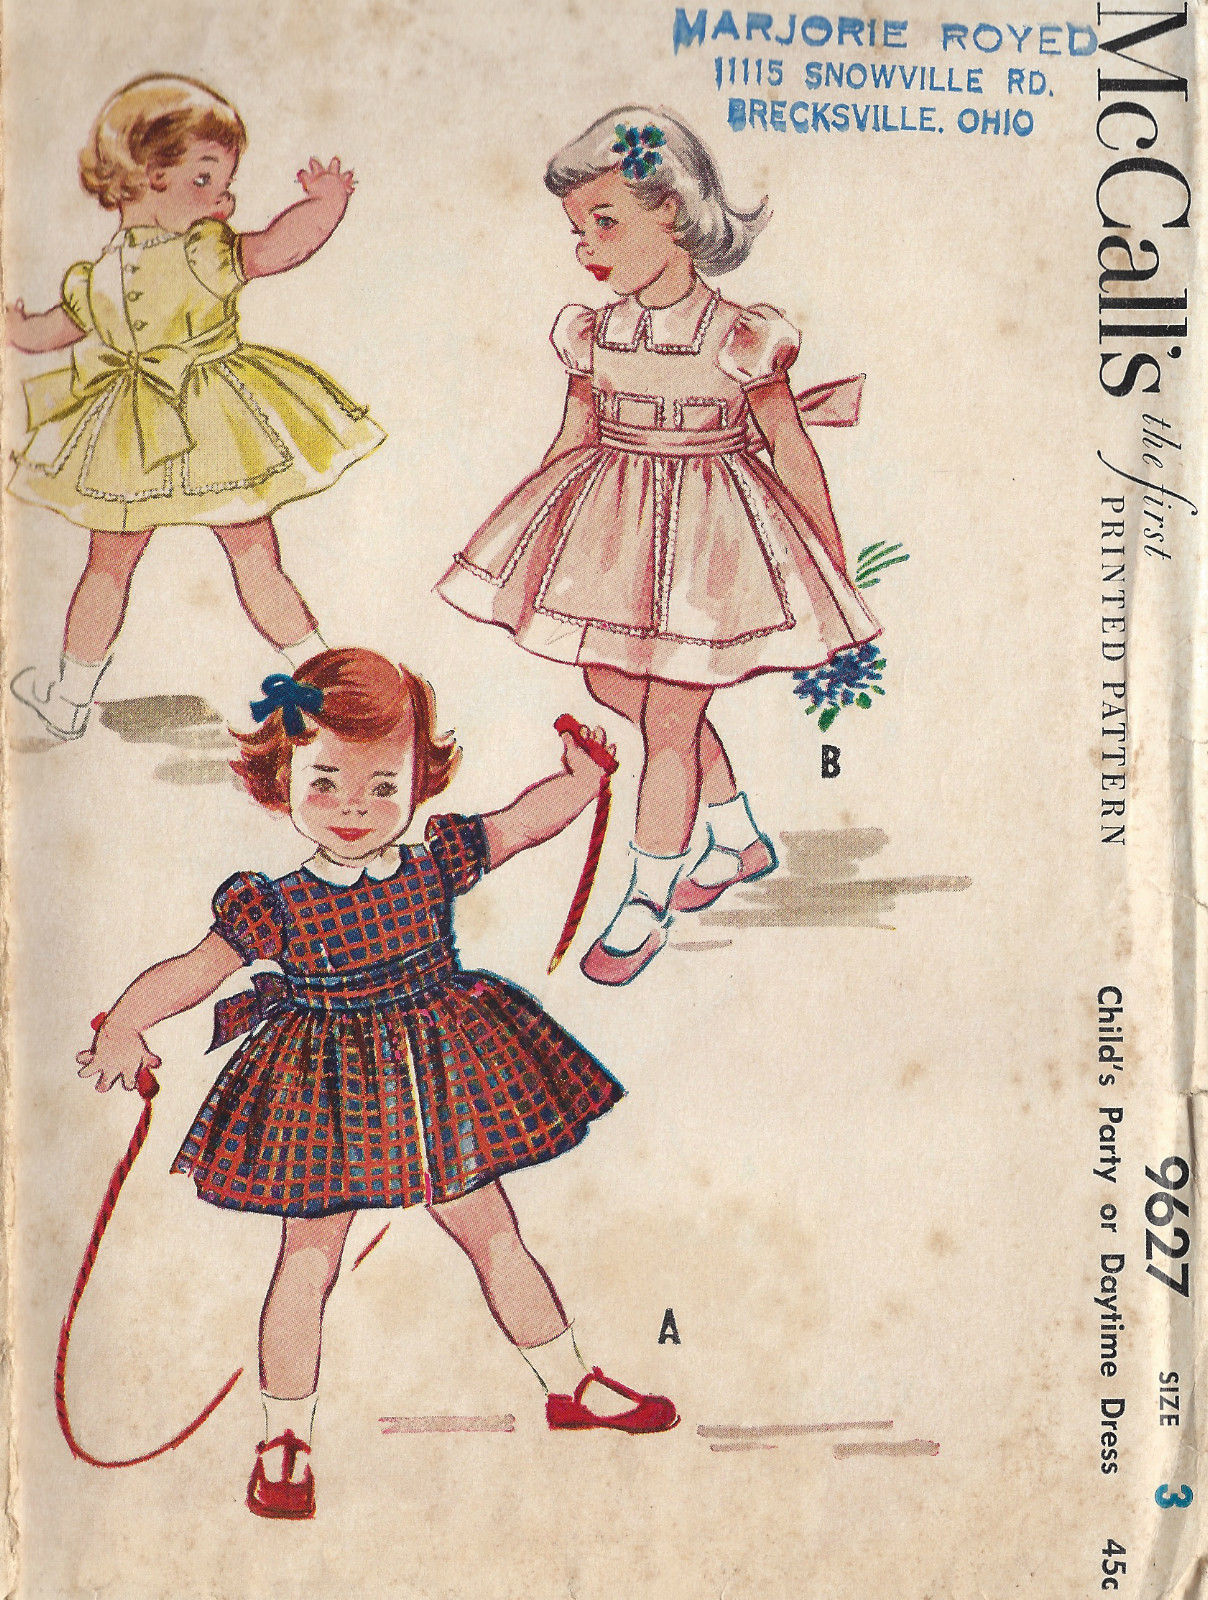 1953 Childrens Vintage Sewing Pattern S3 C22 DAY or PARTY DRESS (C12) -  The Vintage Pattern Shop